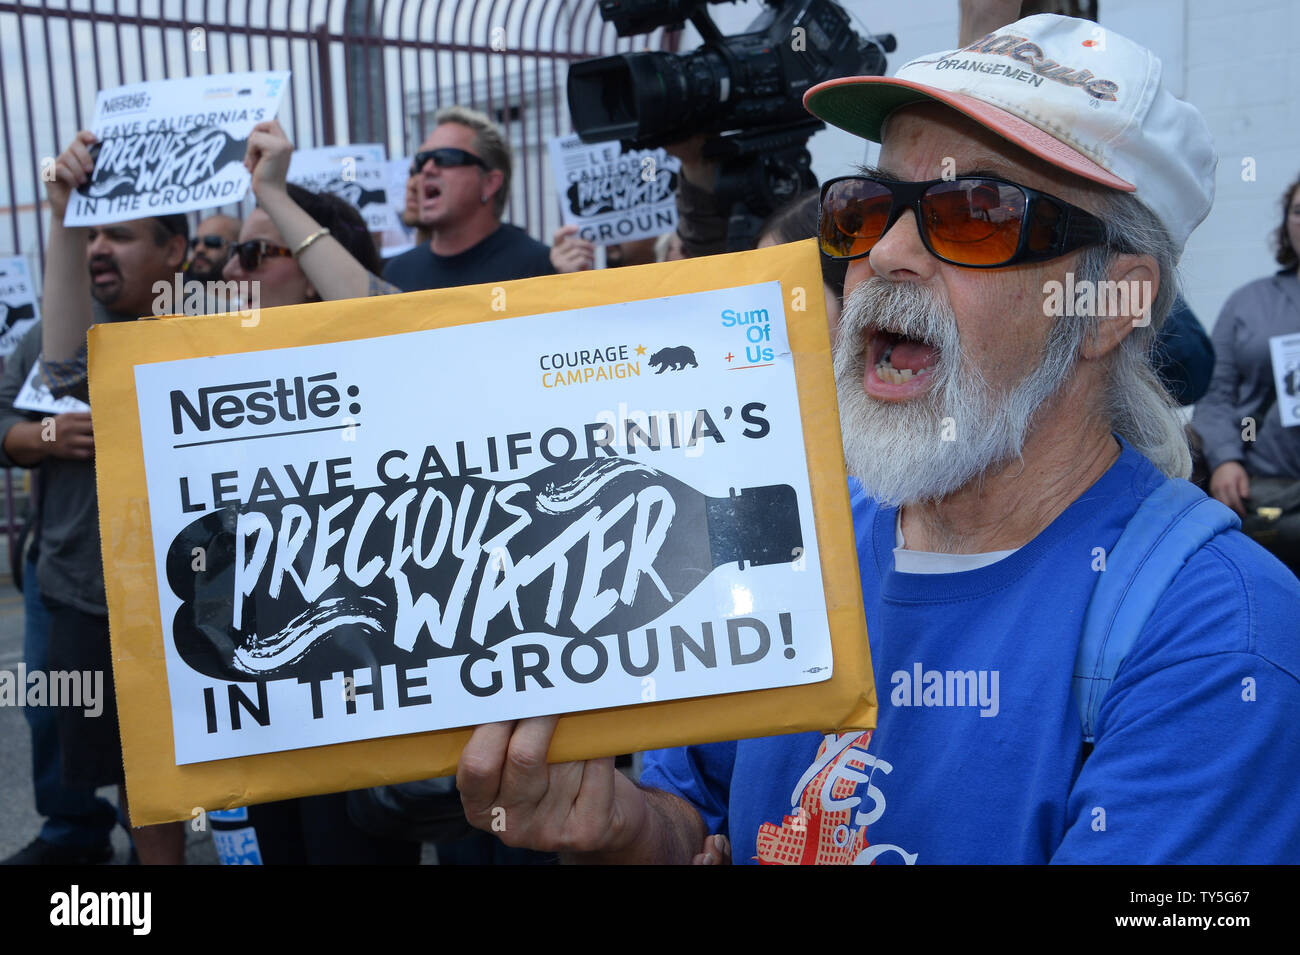 https://c8.alamy.com/comp/TY5G67/protesters-rally-outside-a-nestle-water-bottling-plant-in-los-angeles-on-may-20-2015-demanding-that-the-company-halt-its-operations-in-response-to-the-states-drought-an-investigation-by-the-desert-sun-found-that-nestle-waters-north-americas-permit-to-transport-water-across-the-san-bernardino-national-forest-expired-in-1988-the-water-is-piped-across-the-national-forest-and-loaded-on-trucks-to-a-plant-where-it-is-bottled-as-arrowhead-100-percent-mountain-spring-water-photo-by-jim-ruymenupi-TY5G67.jpg